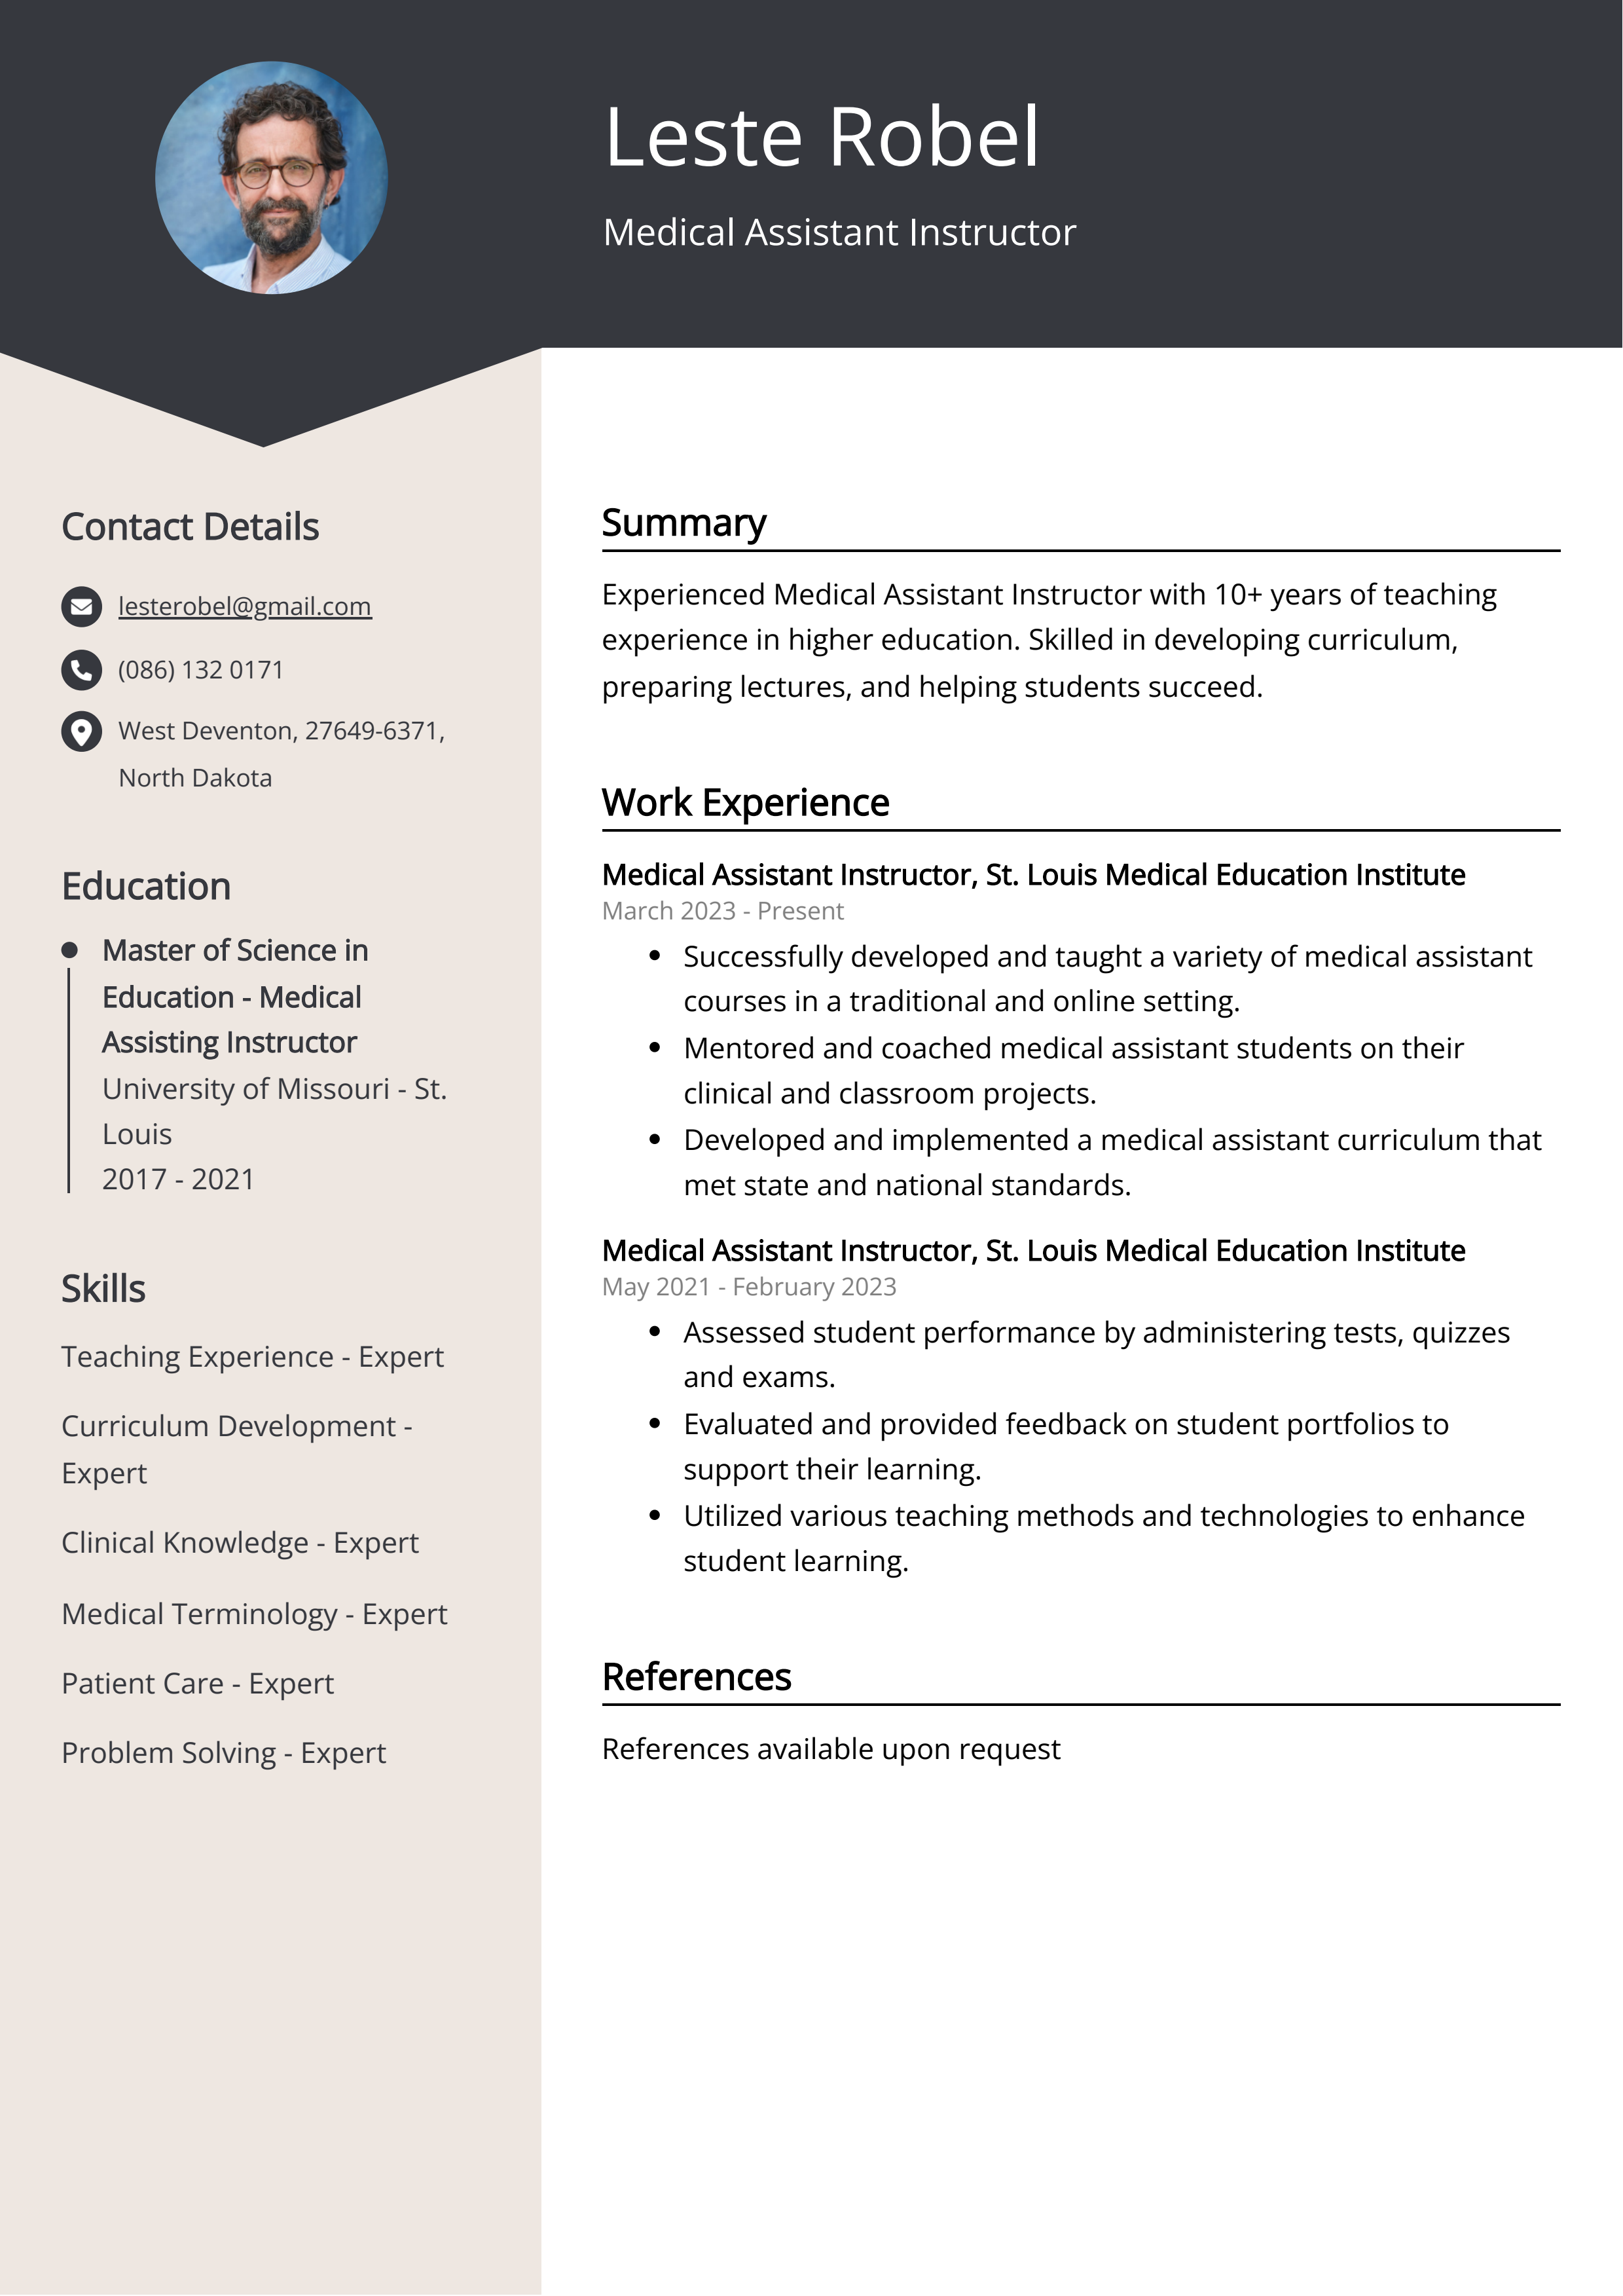 Medical Assistant Instructor Resume Example